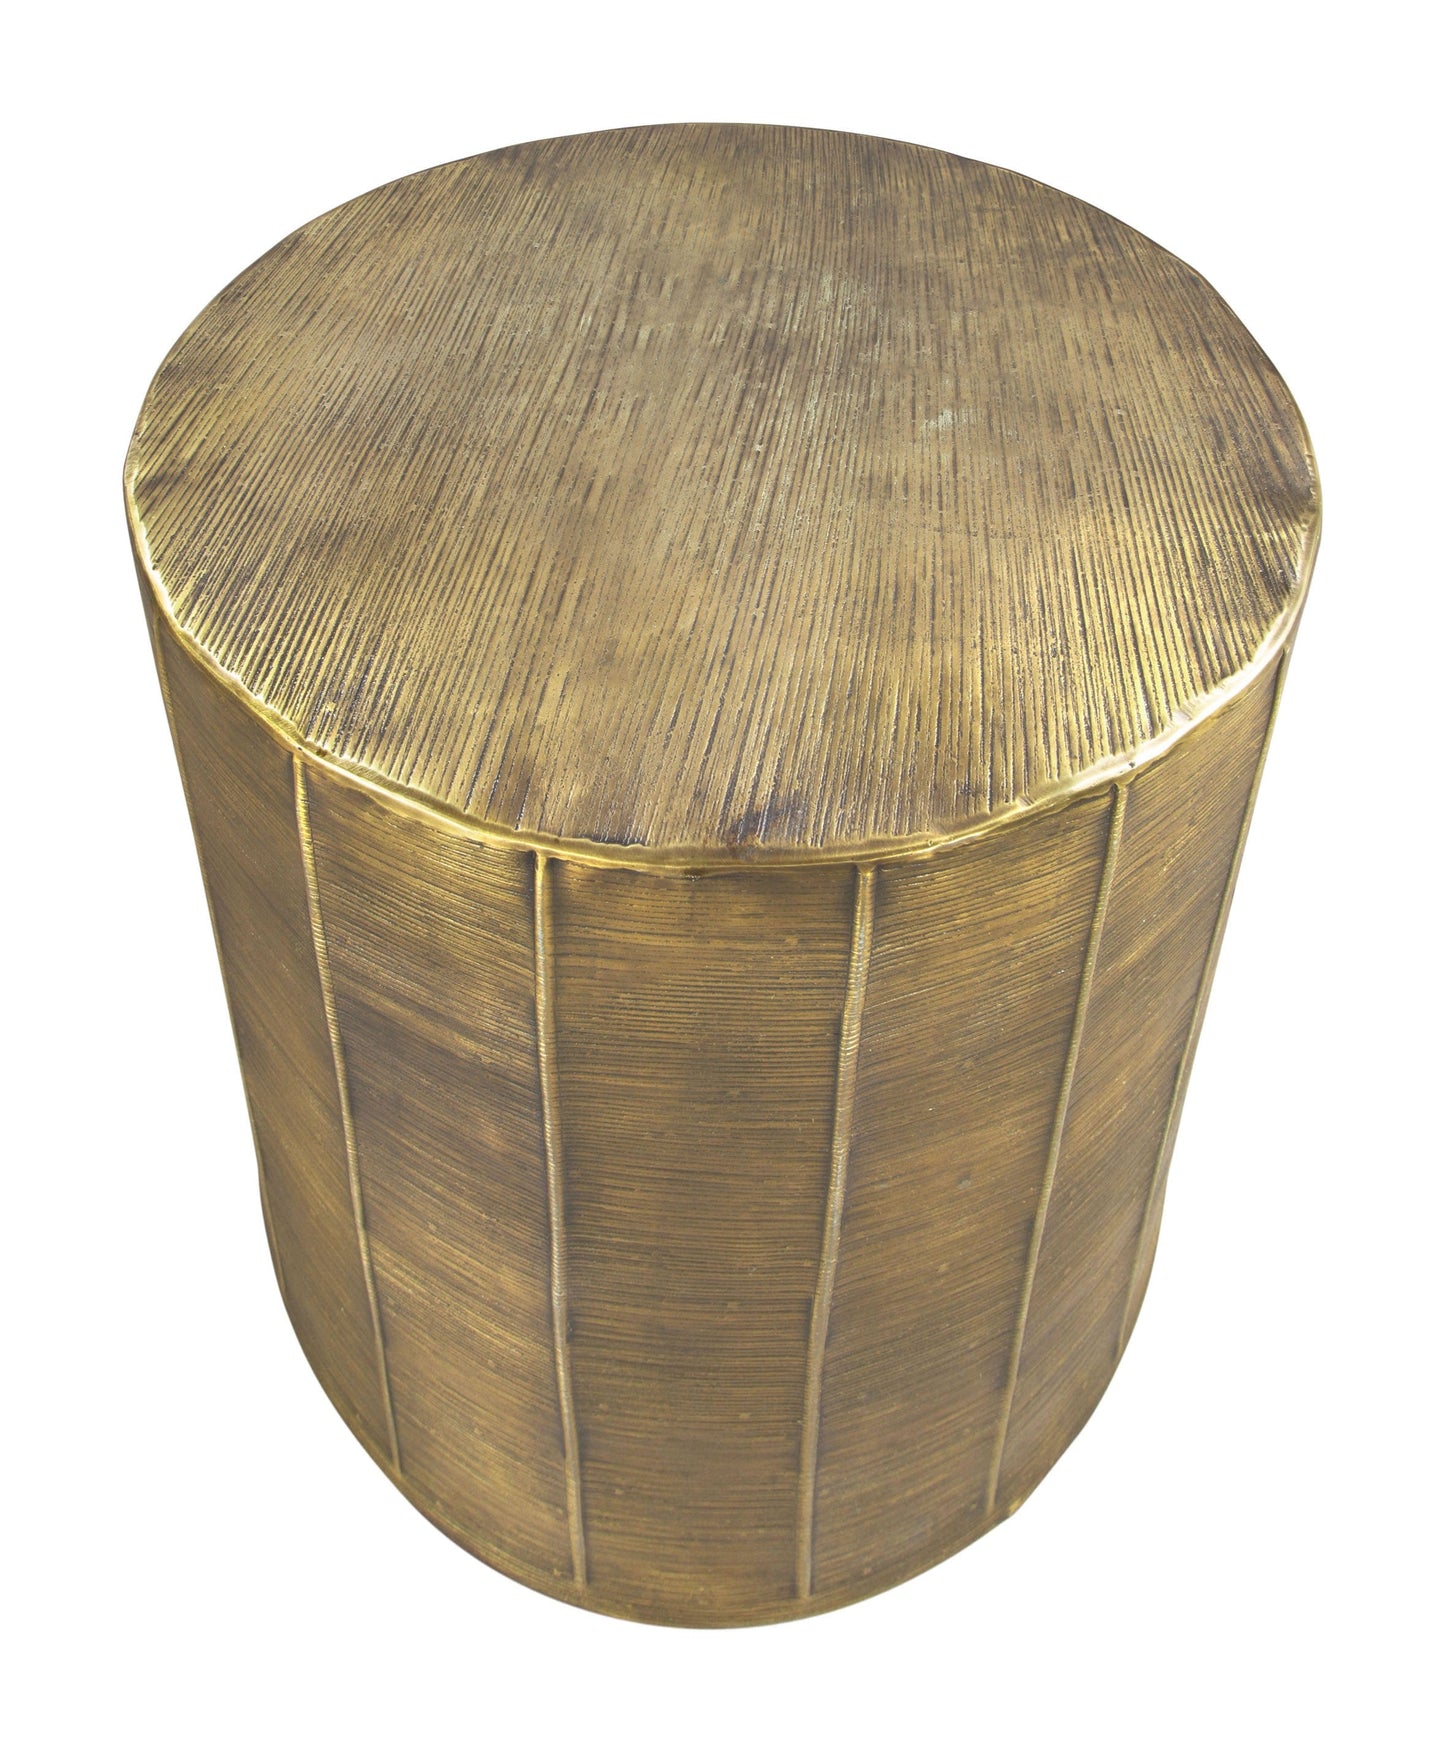 Top view of modern side table